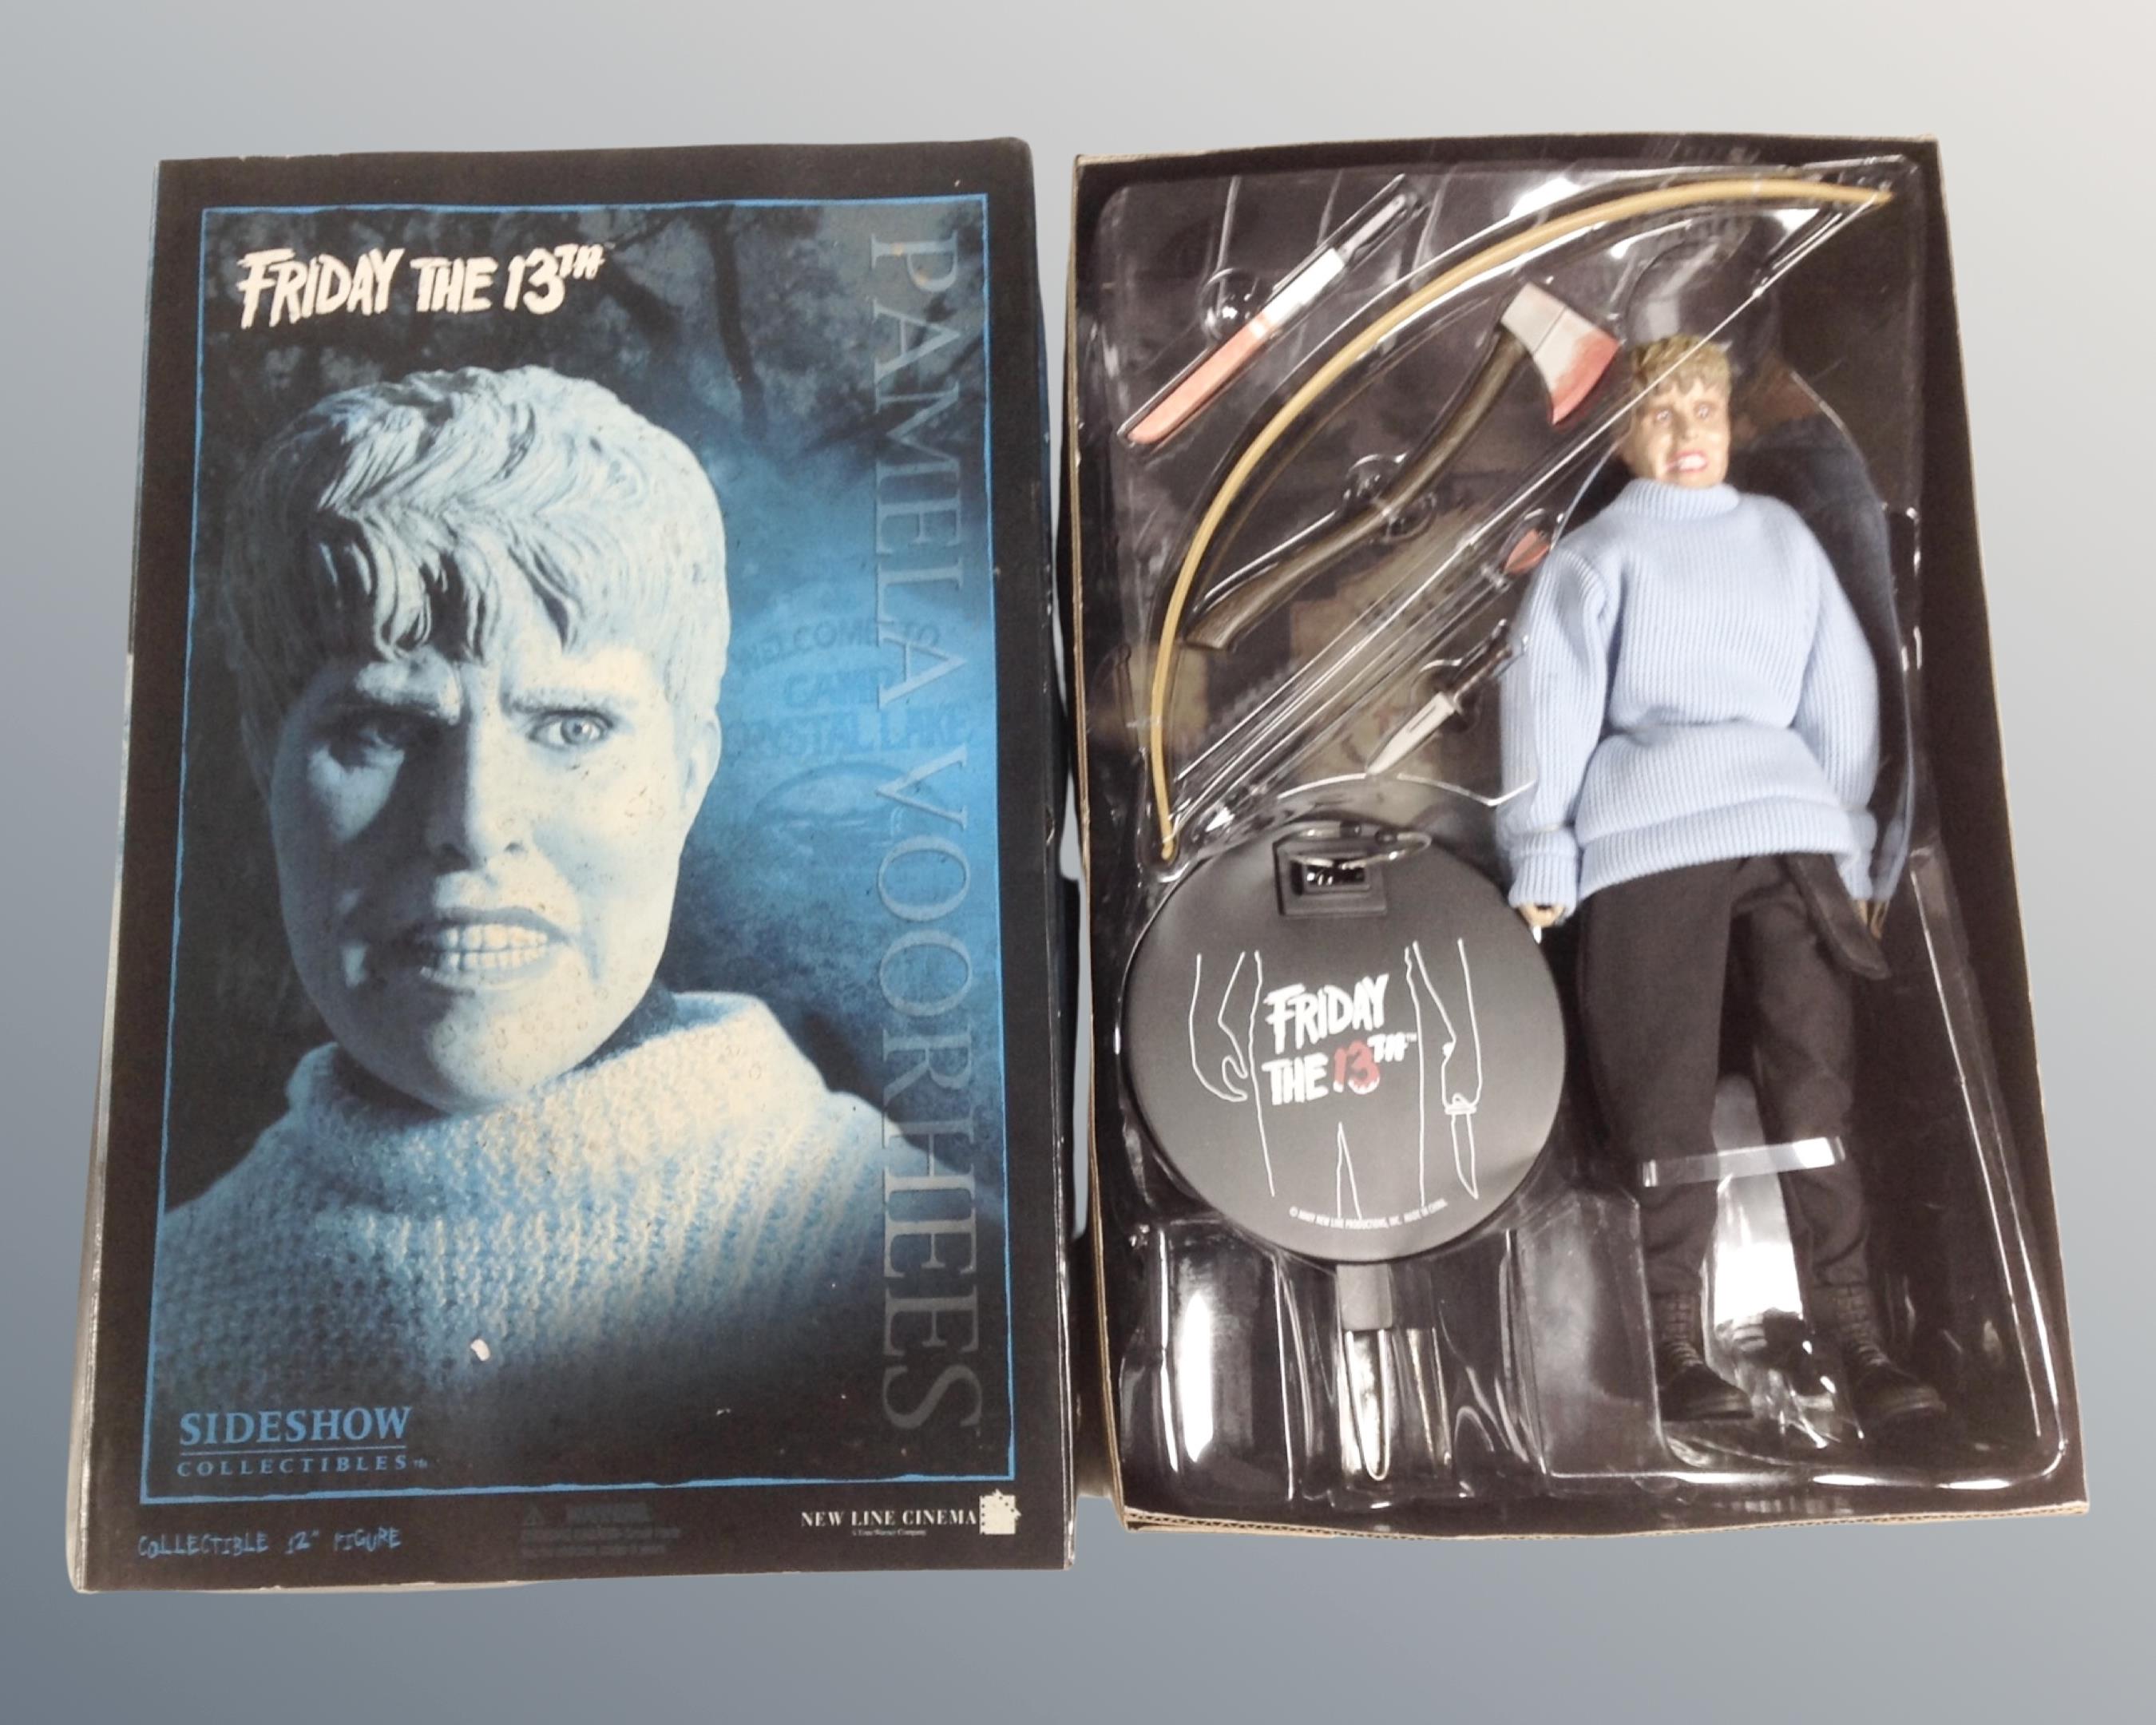 A Sideshow Collectibles Friday The 13th Pamela Voorhees 12" figure, boxed.